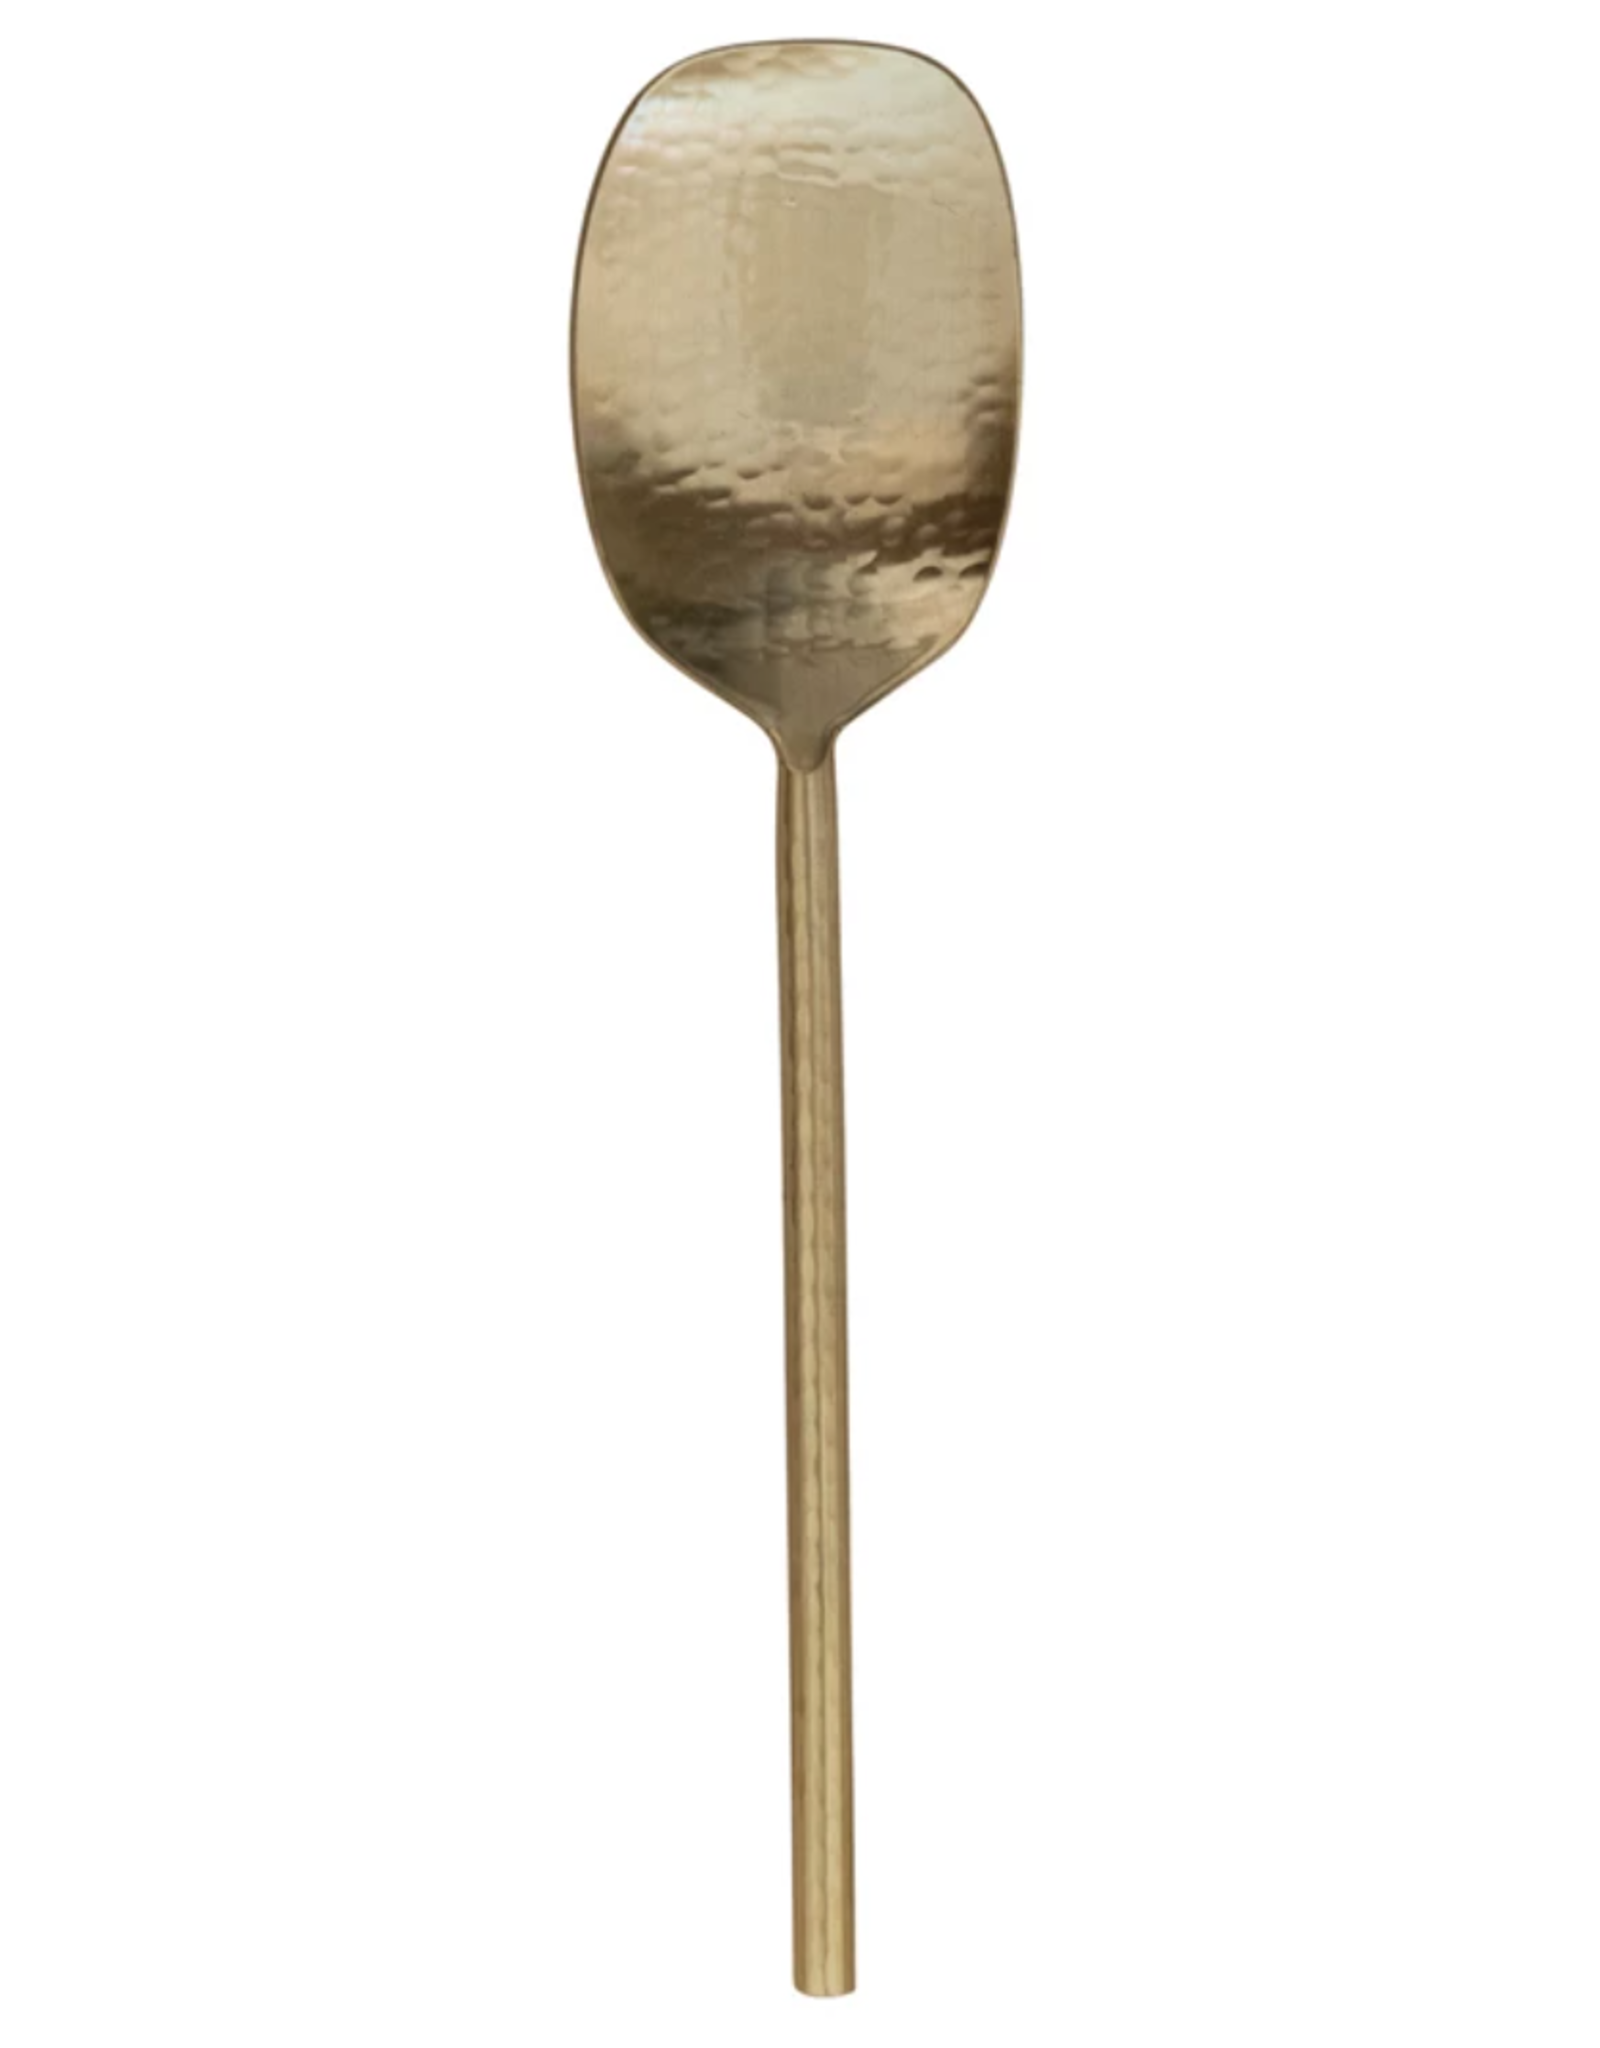 Bloomingville Gold Hammered Stainless Steel Serving Spoon